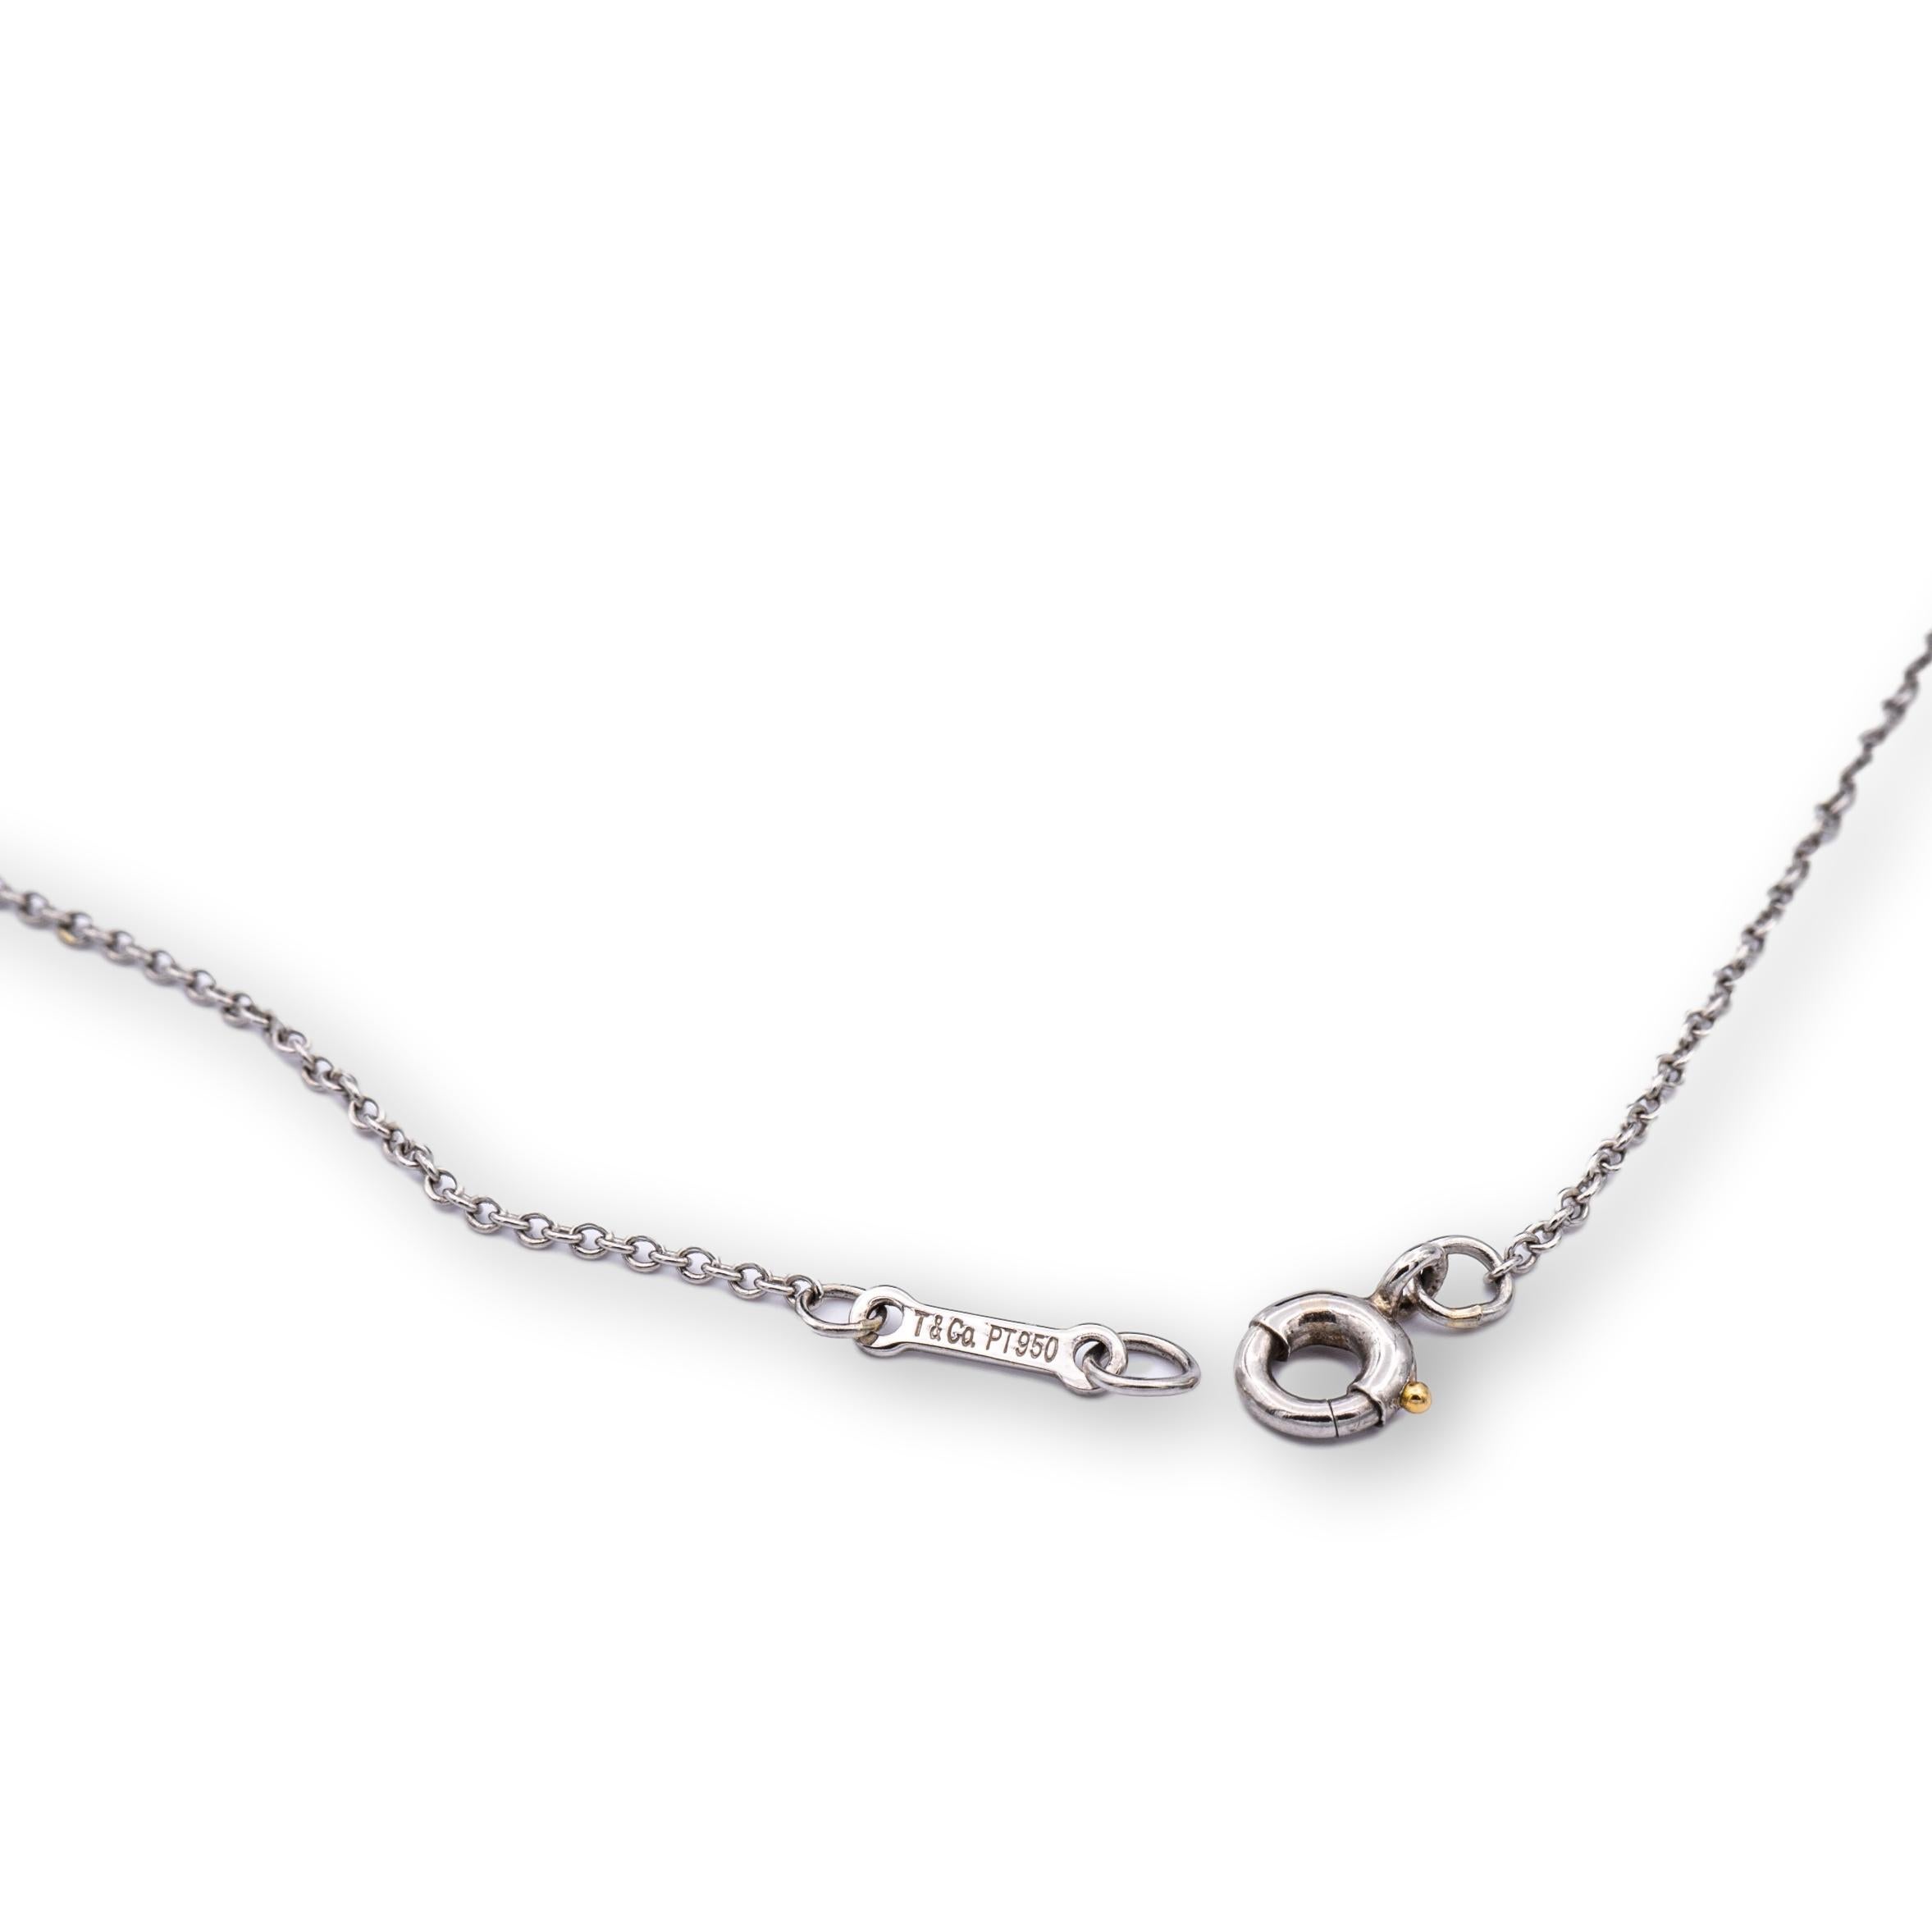 Tiffany & Co. pearls by the yard necklace designed by Elsa Peretti finely crafted in platinum featuring seven freshwater cultured pink pearl stations on a delicate 16